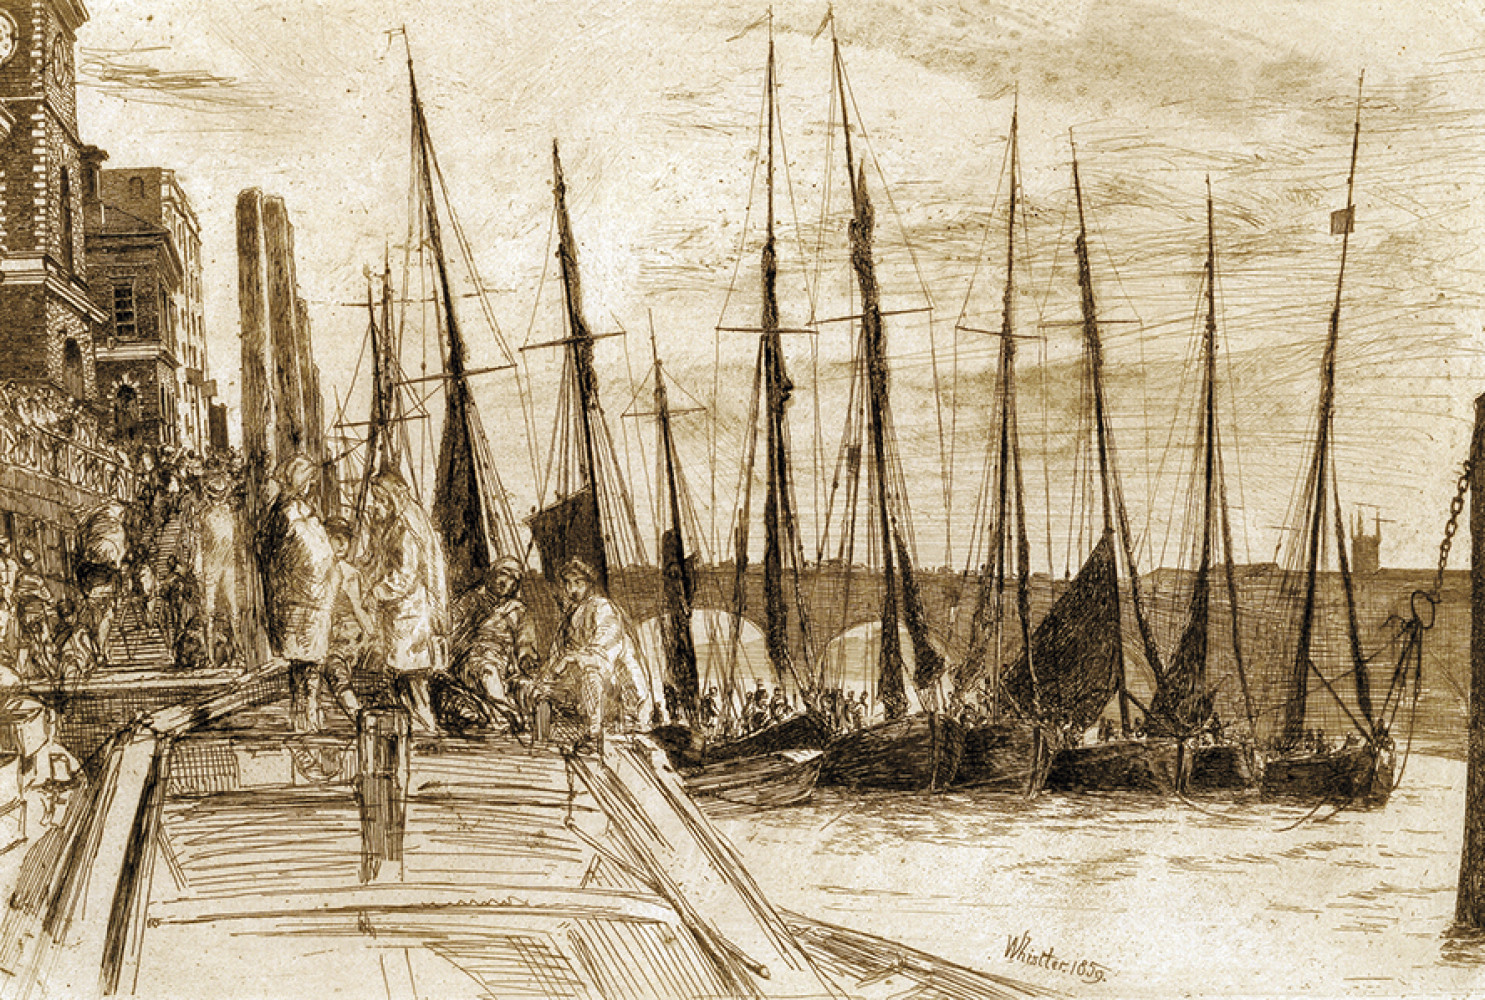 Billingsgate, 1859, by James McNeill Whistler (American, 1834-1903); etching on paper; 5 7/8 x 8 3/4 inches; Gift of Dr. and Mrs. (Caroline) Anton Vreede; 2004.004.0007 